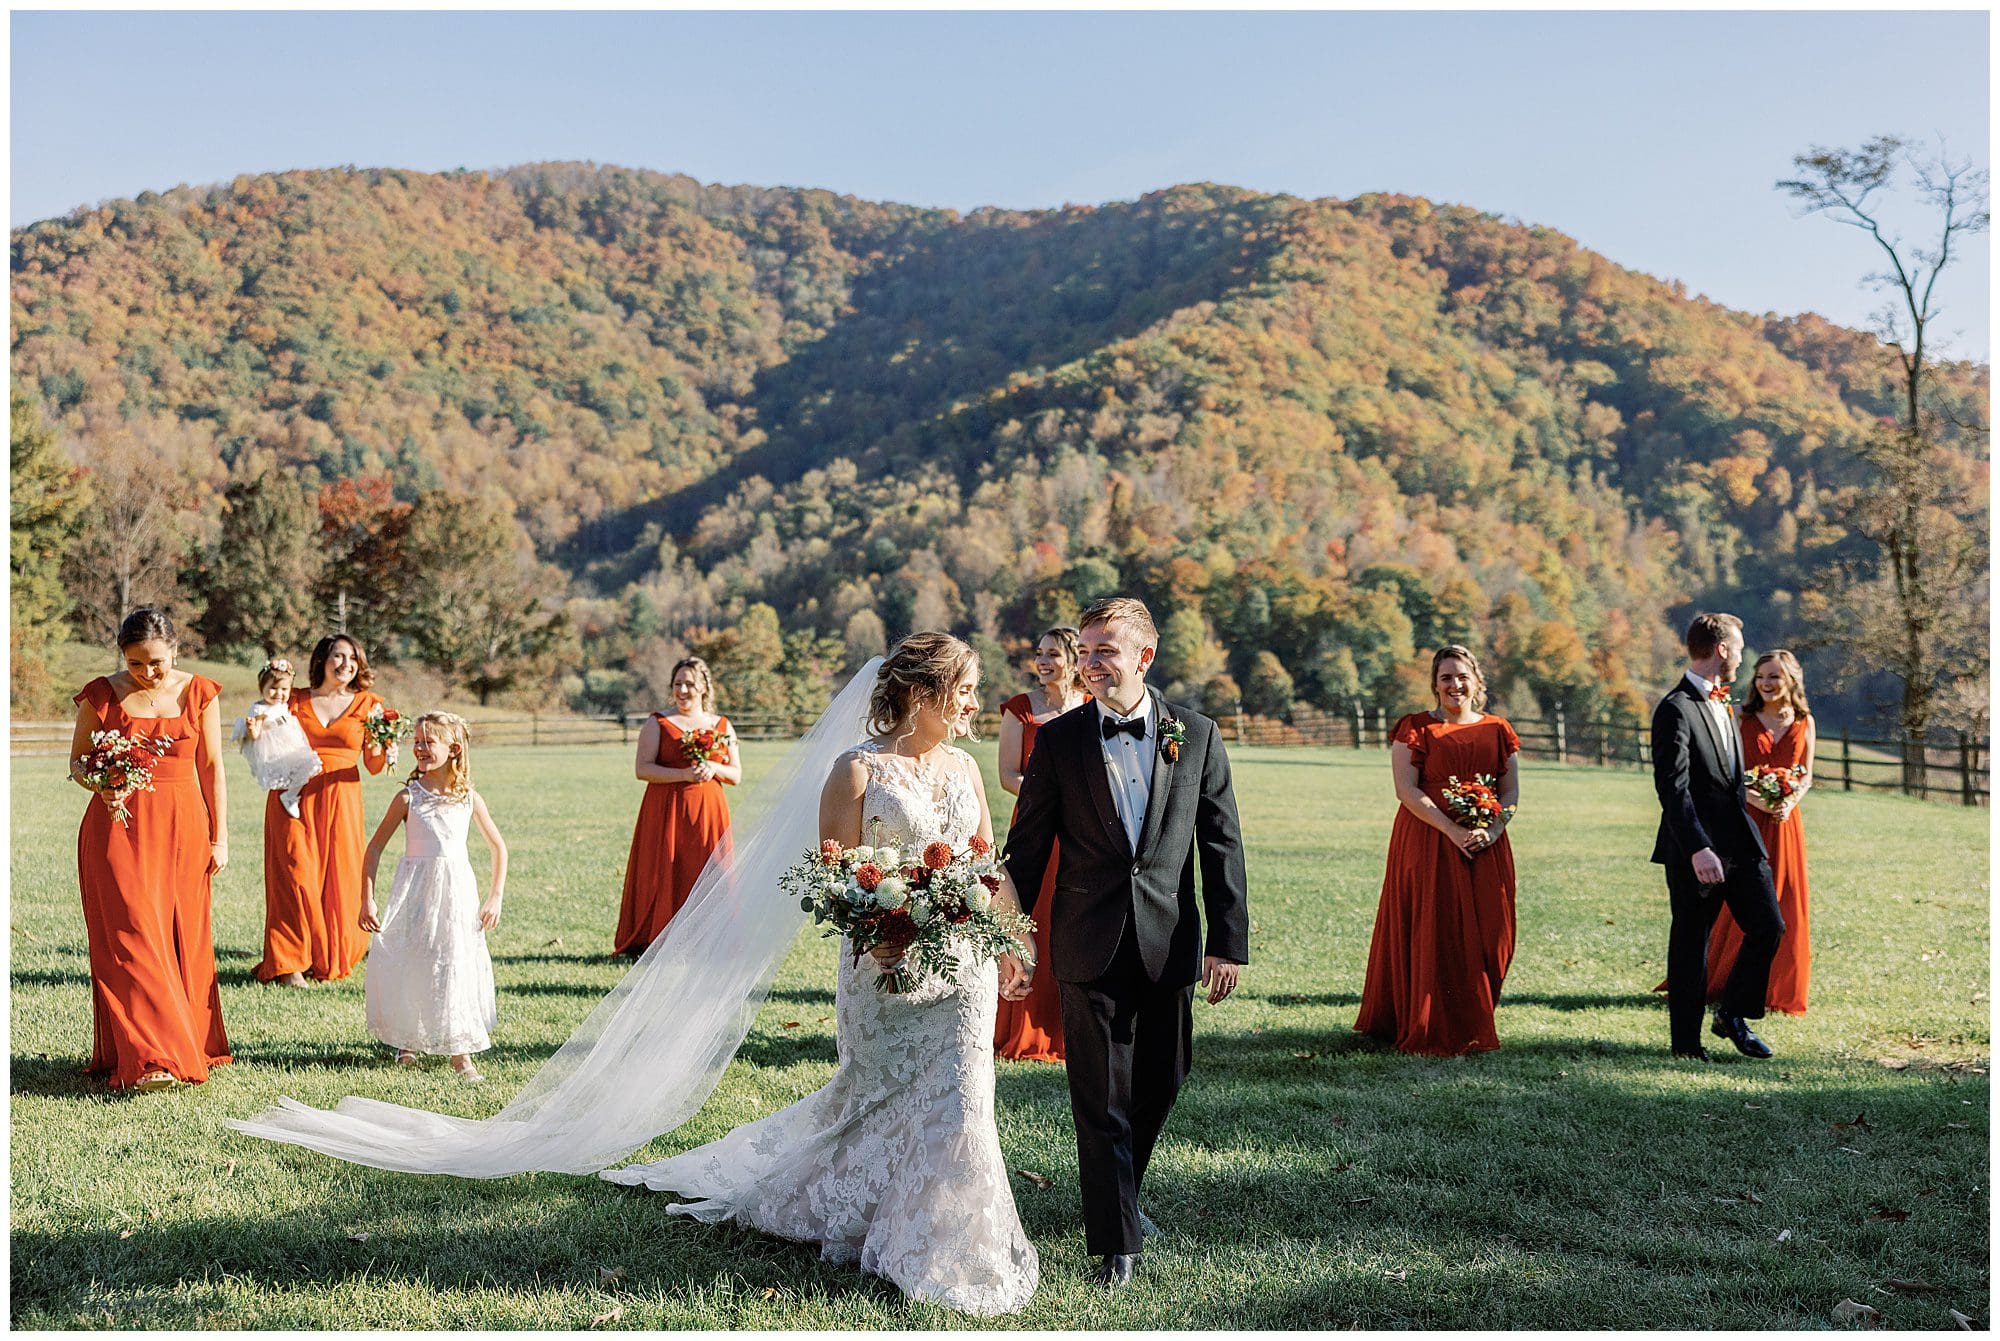 A bride and groom walk hand-in-hand at their outdoor wedding, with bridesmaids in orange dresses and groomsmen in the background, all against a backdrop of autumn mountains.